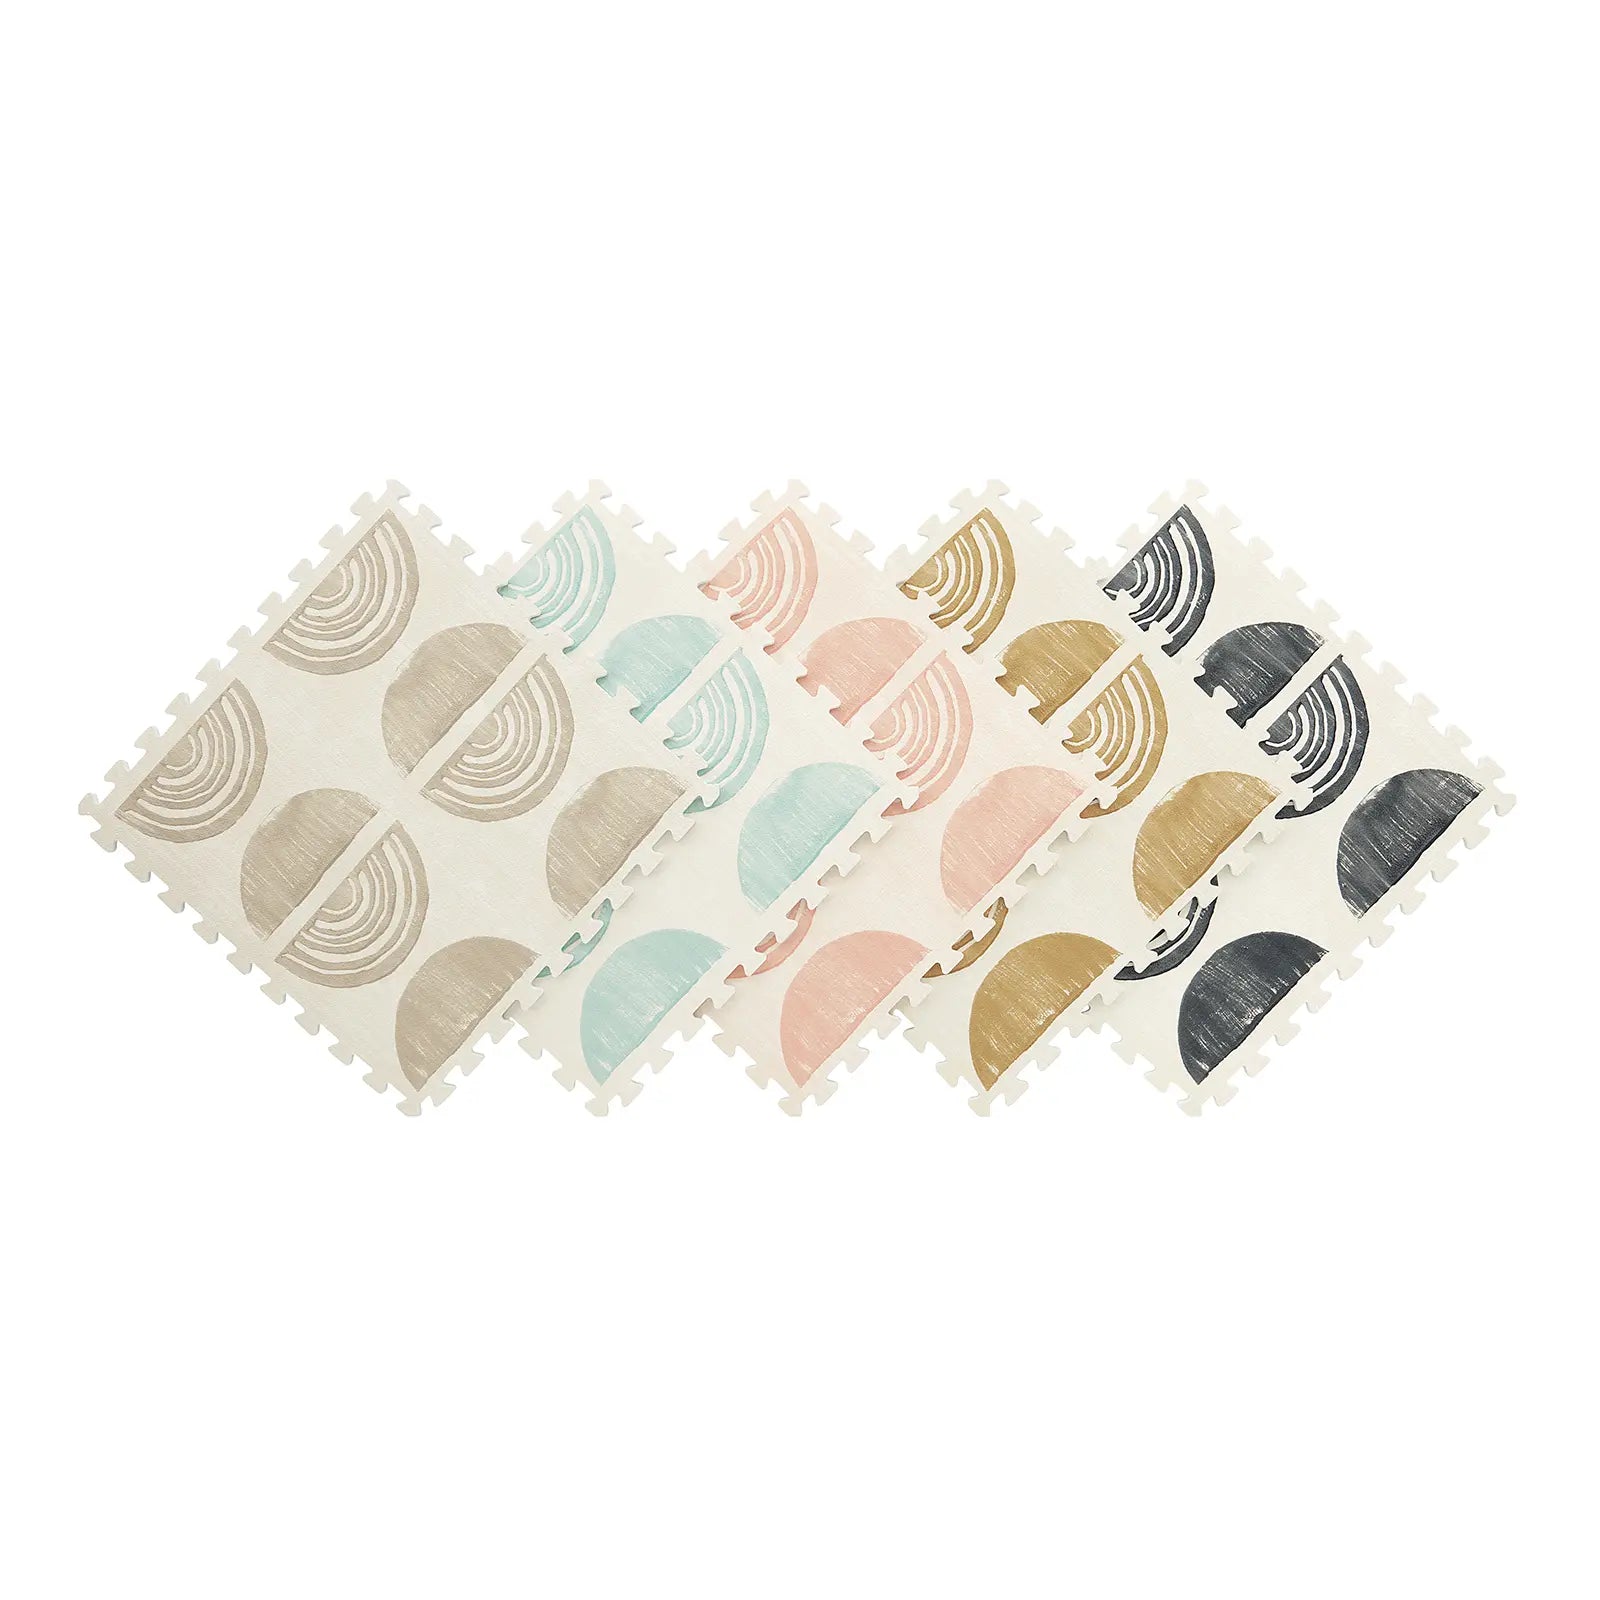 Overhead image of individual foam tiles of the Ada Play Mat in Pebble, Celadon, Melon, Sunflower, and Char.